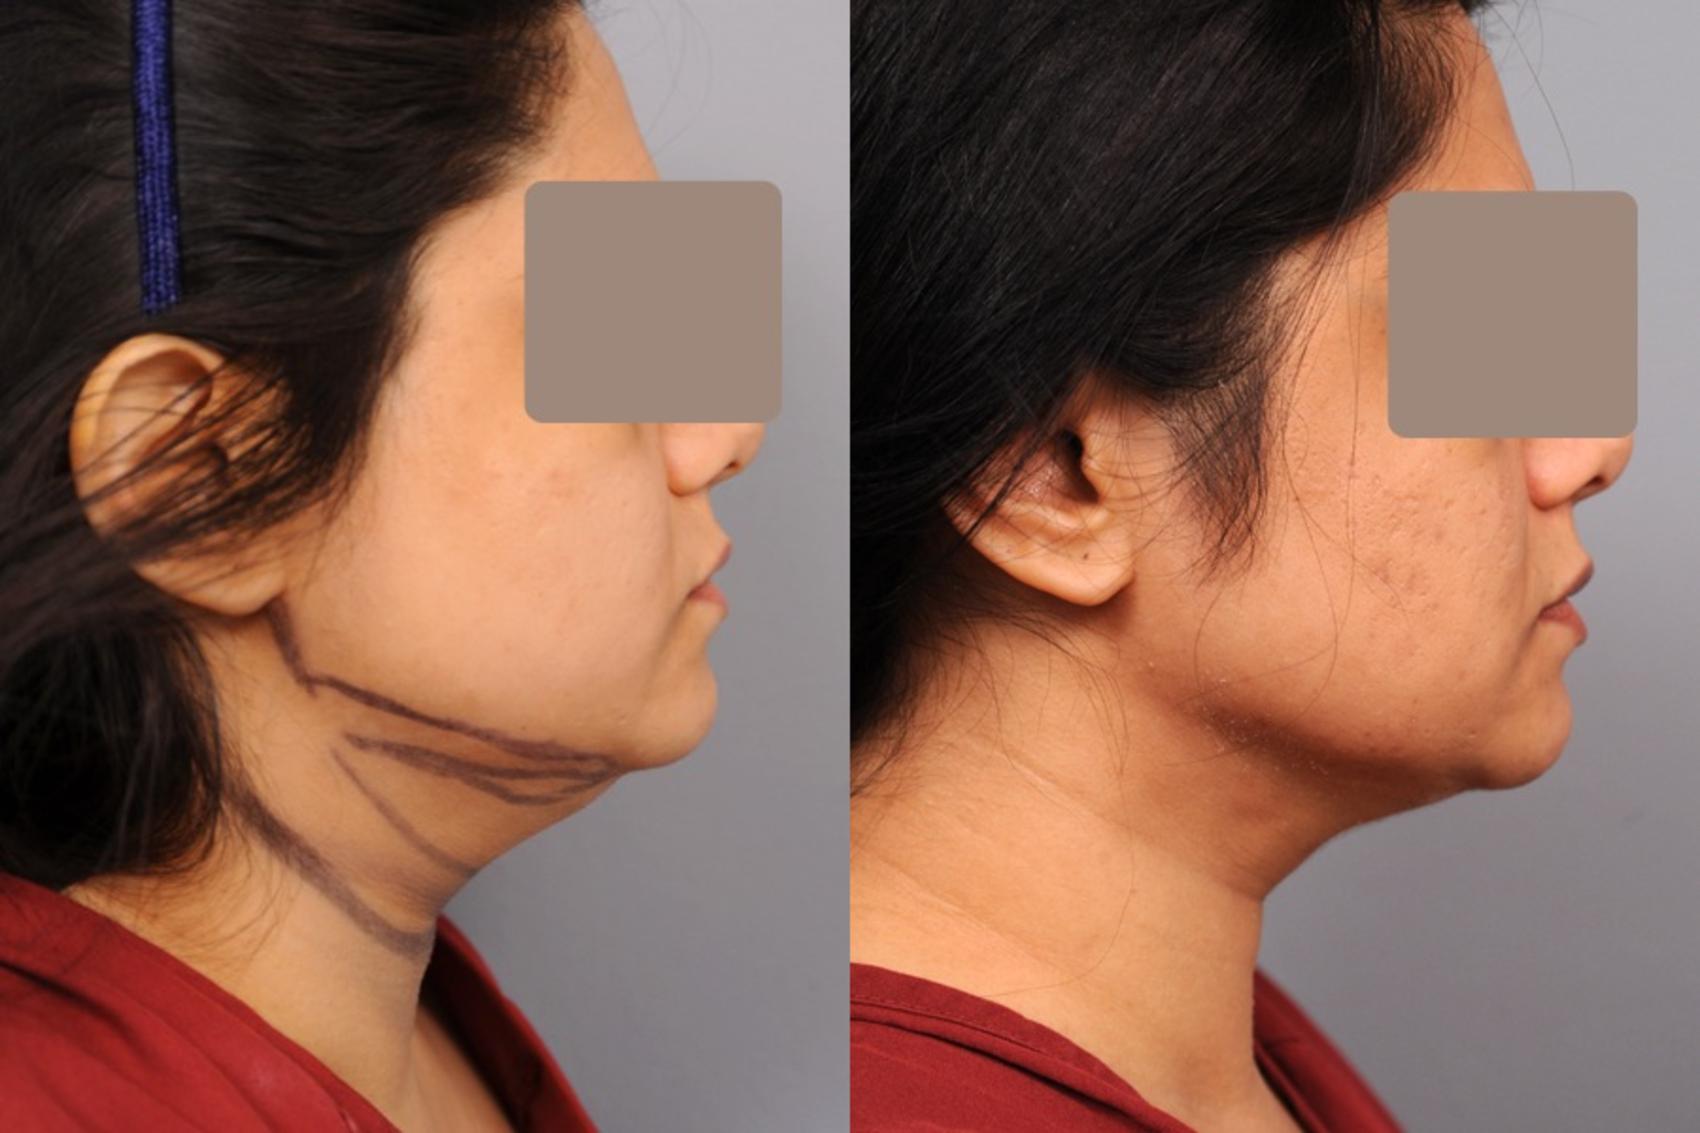 Neck Liposuction With Smartlipo™ In New York